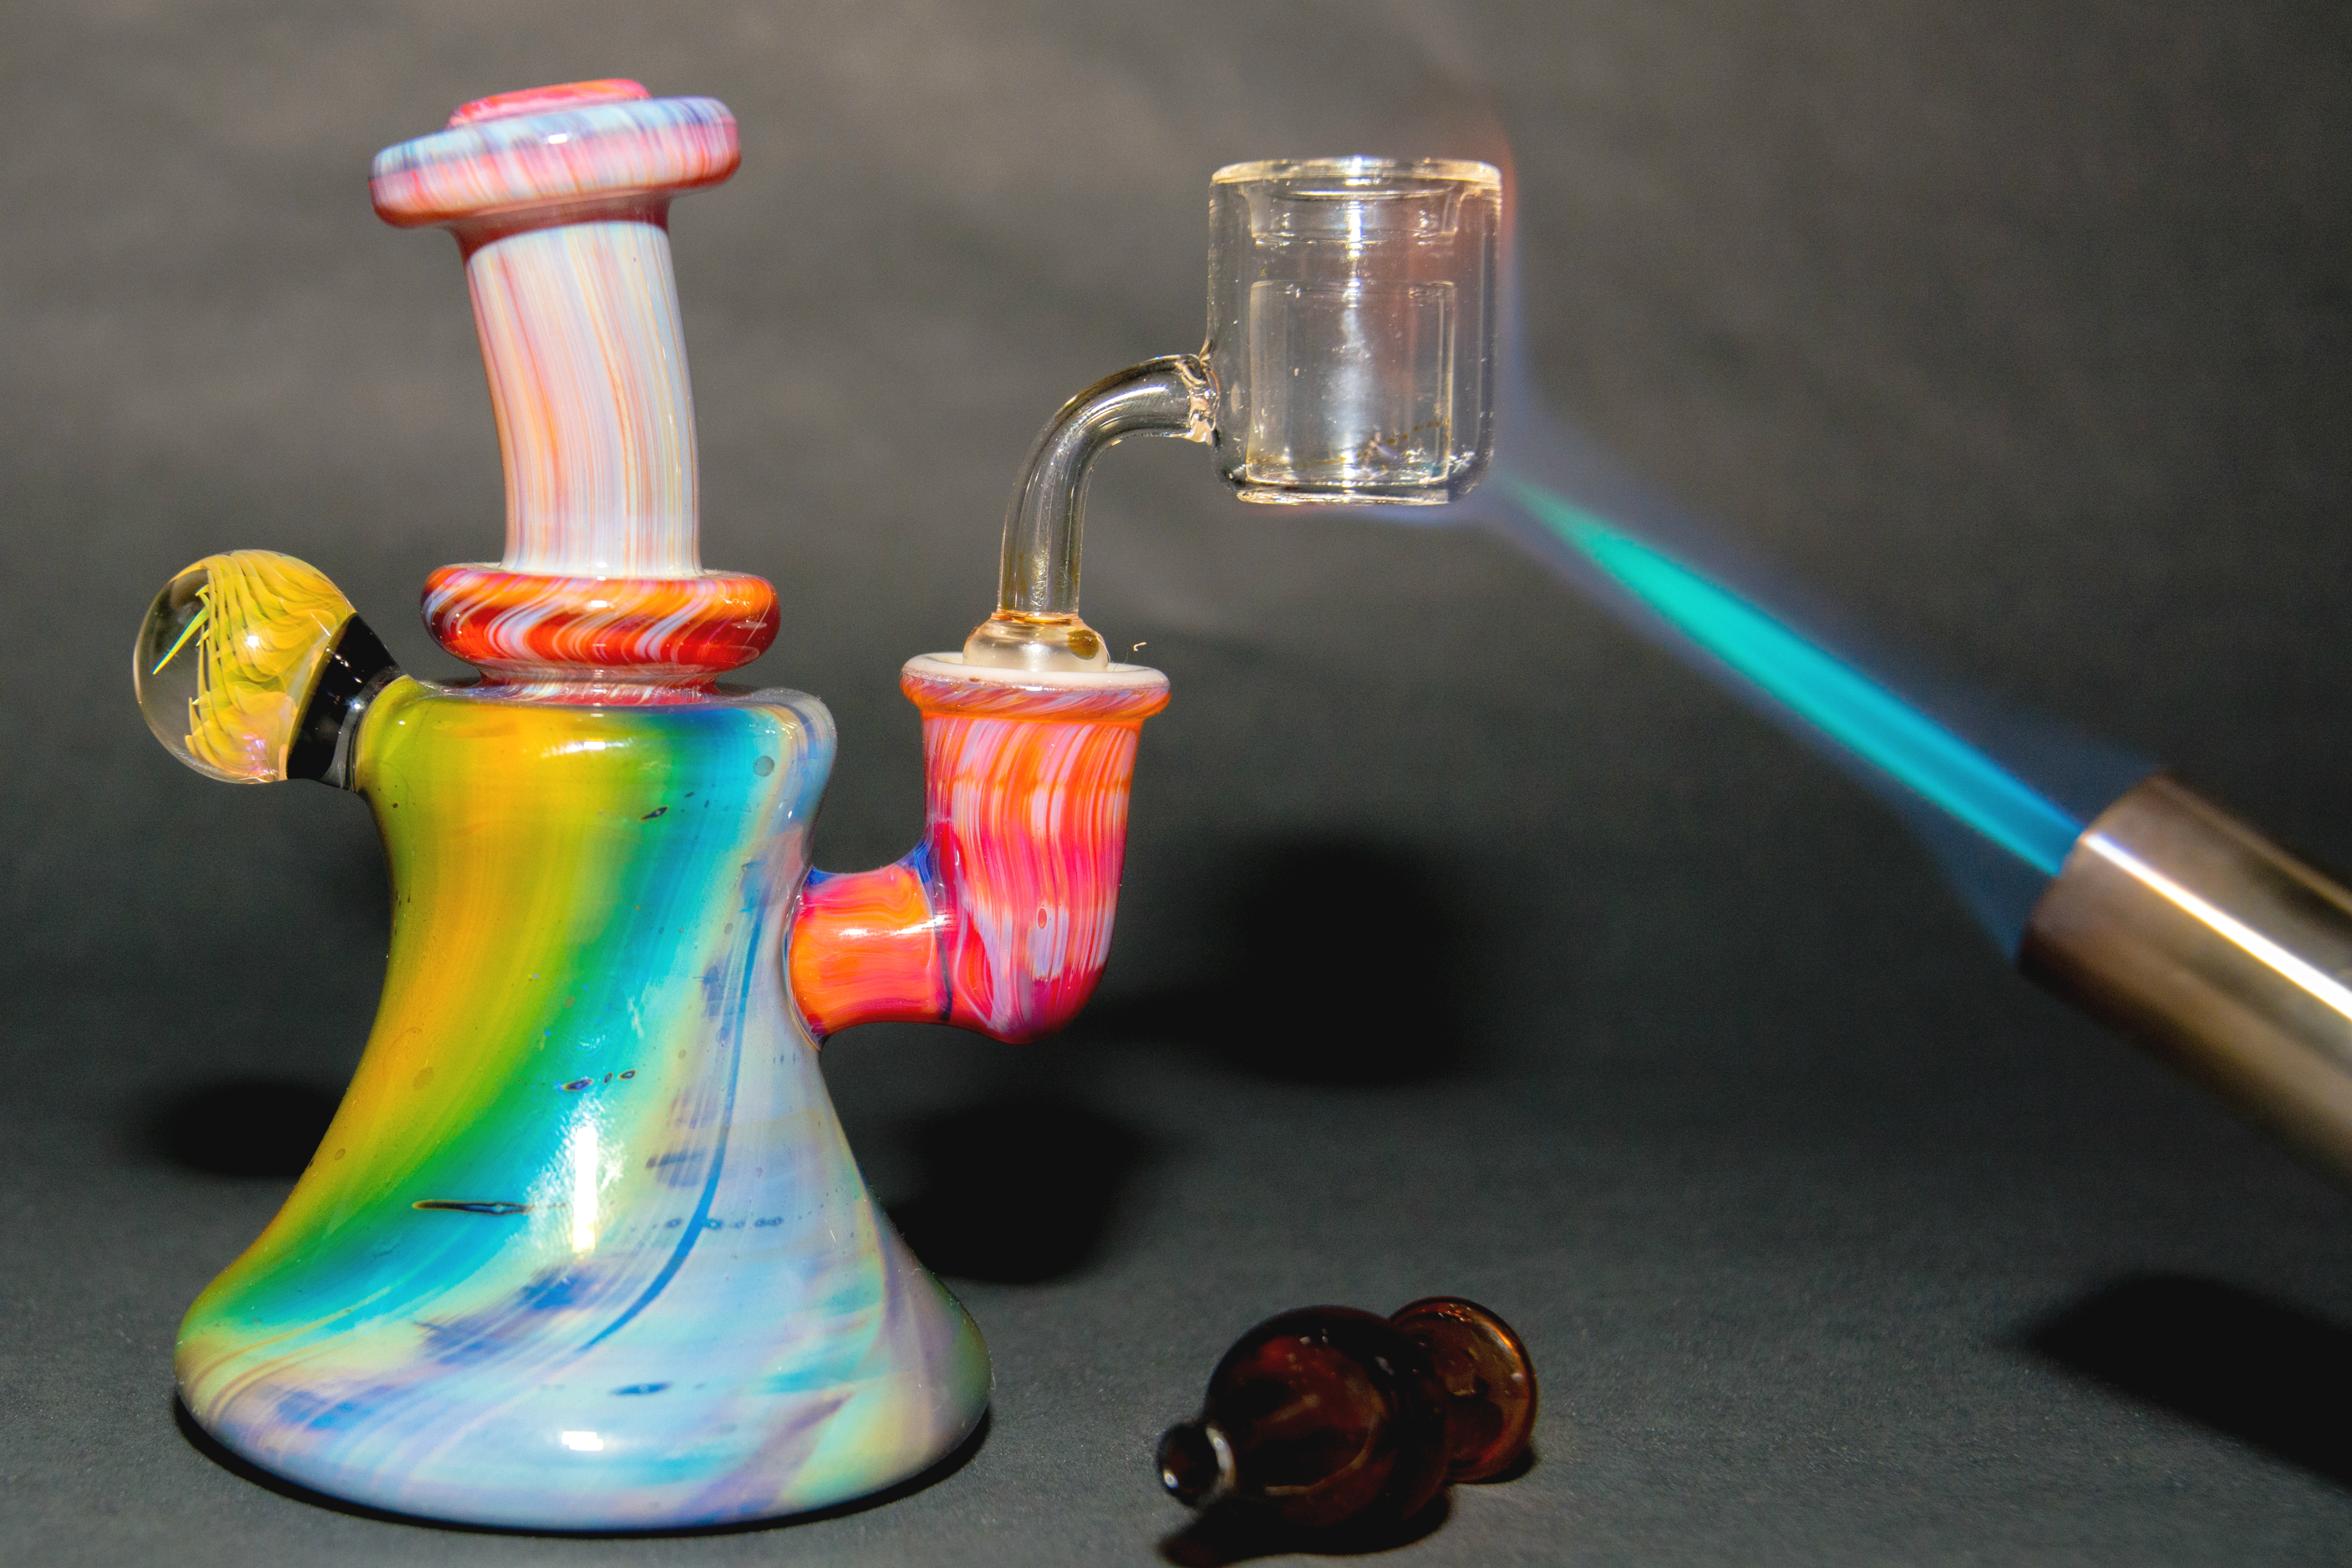 How Long Should You Heat Your Nail or Banger Before a Dab? | PotGuide